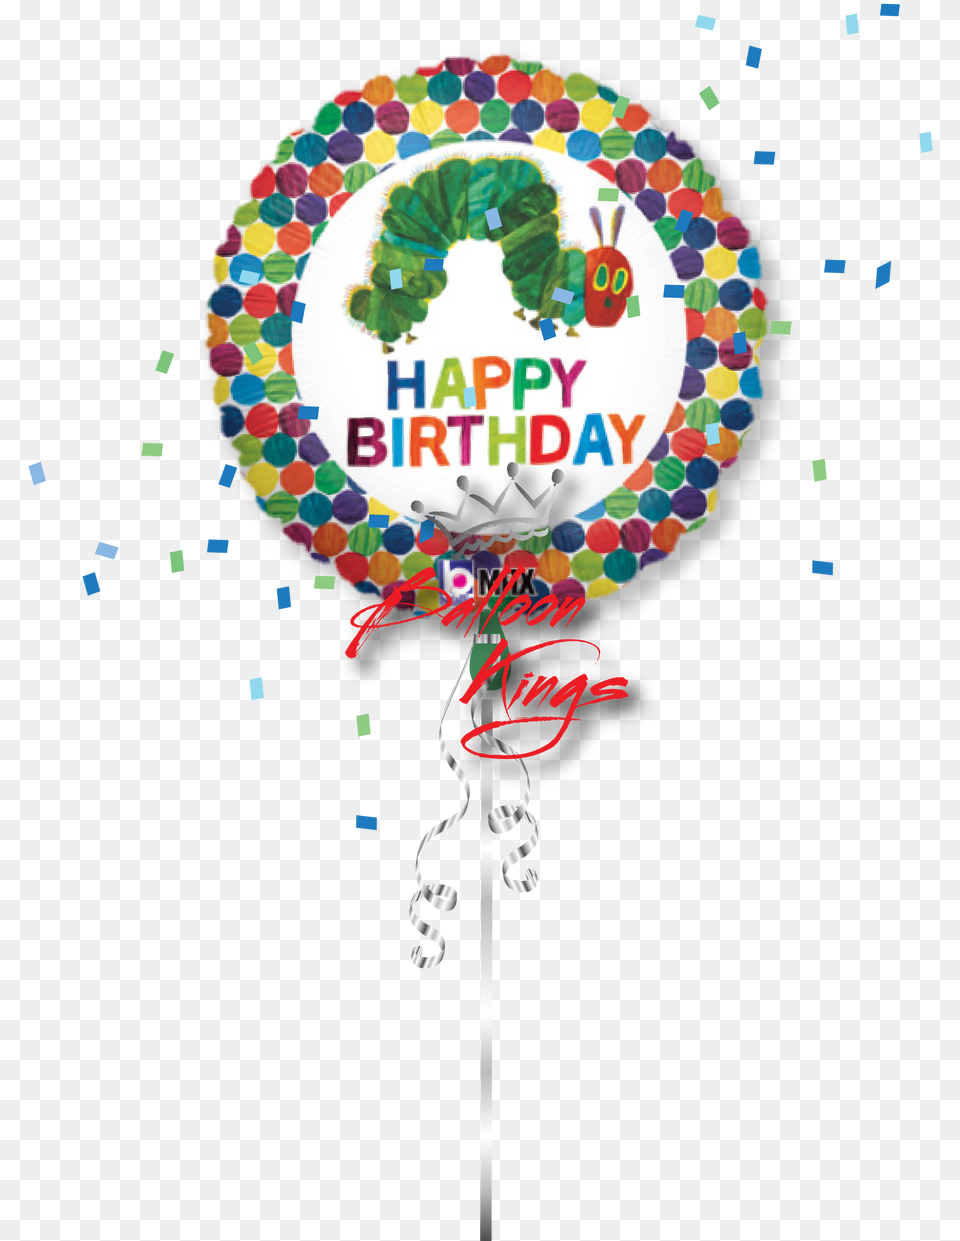 Happy Birthday The Very Hungry Caterpillar Happy Birthday Very Hungry Caterpillar, Balloon, Food, Sweets Png Image